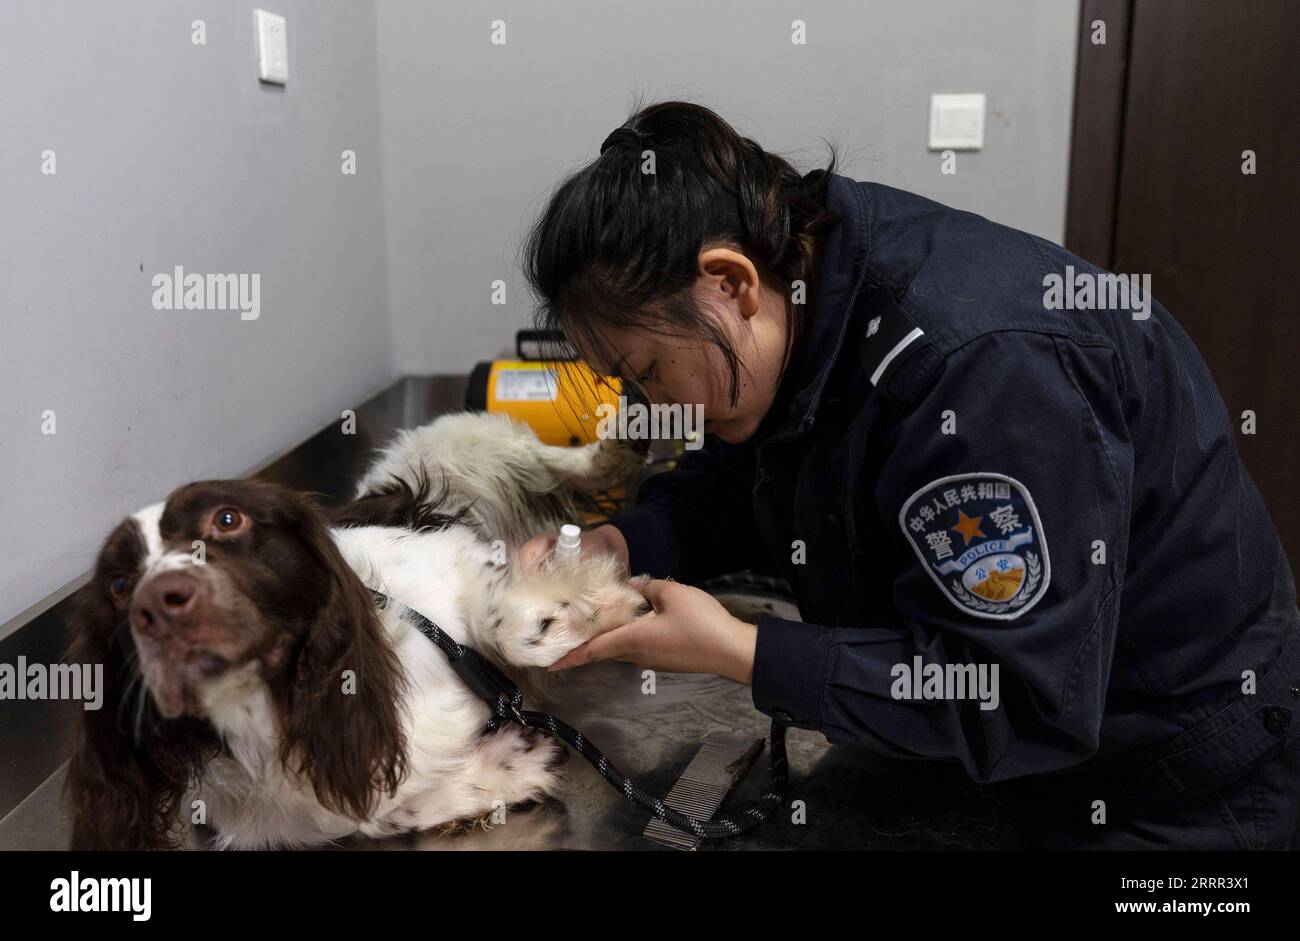 230501 -- ALATAW PASS, May 1, 2023 -- Liu Xin applies medicine to the wound of police dog Kang Xin at Alataw Pass, northwest China s Xinjiang Uygur Autonomous Region, April 3, 2023. Alataw Pass is a major land port at the China-Kazakhstan border in northwest China s Xinjiang Uygur Autonomous Region. Cui Hongwu, an official with the border inspection station at the port, has been working for over 10 years. Here he met his wife Liu Xin, who is his colleague and works as a police dog handler. In recent years, the Alataw Pass has seen a growing number and accelerating frequency of inbound and outb Stock Photo